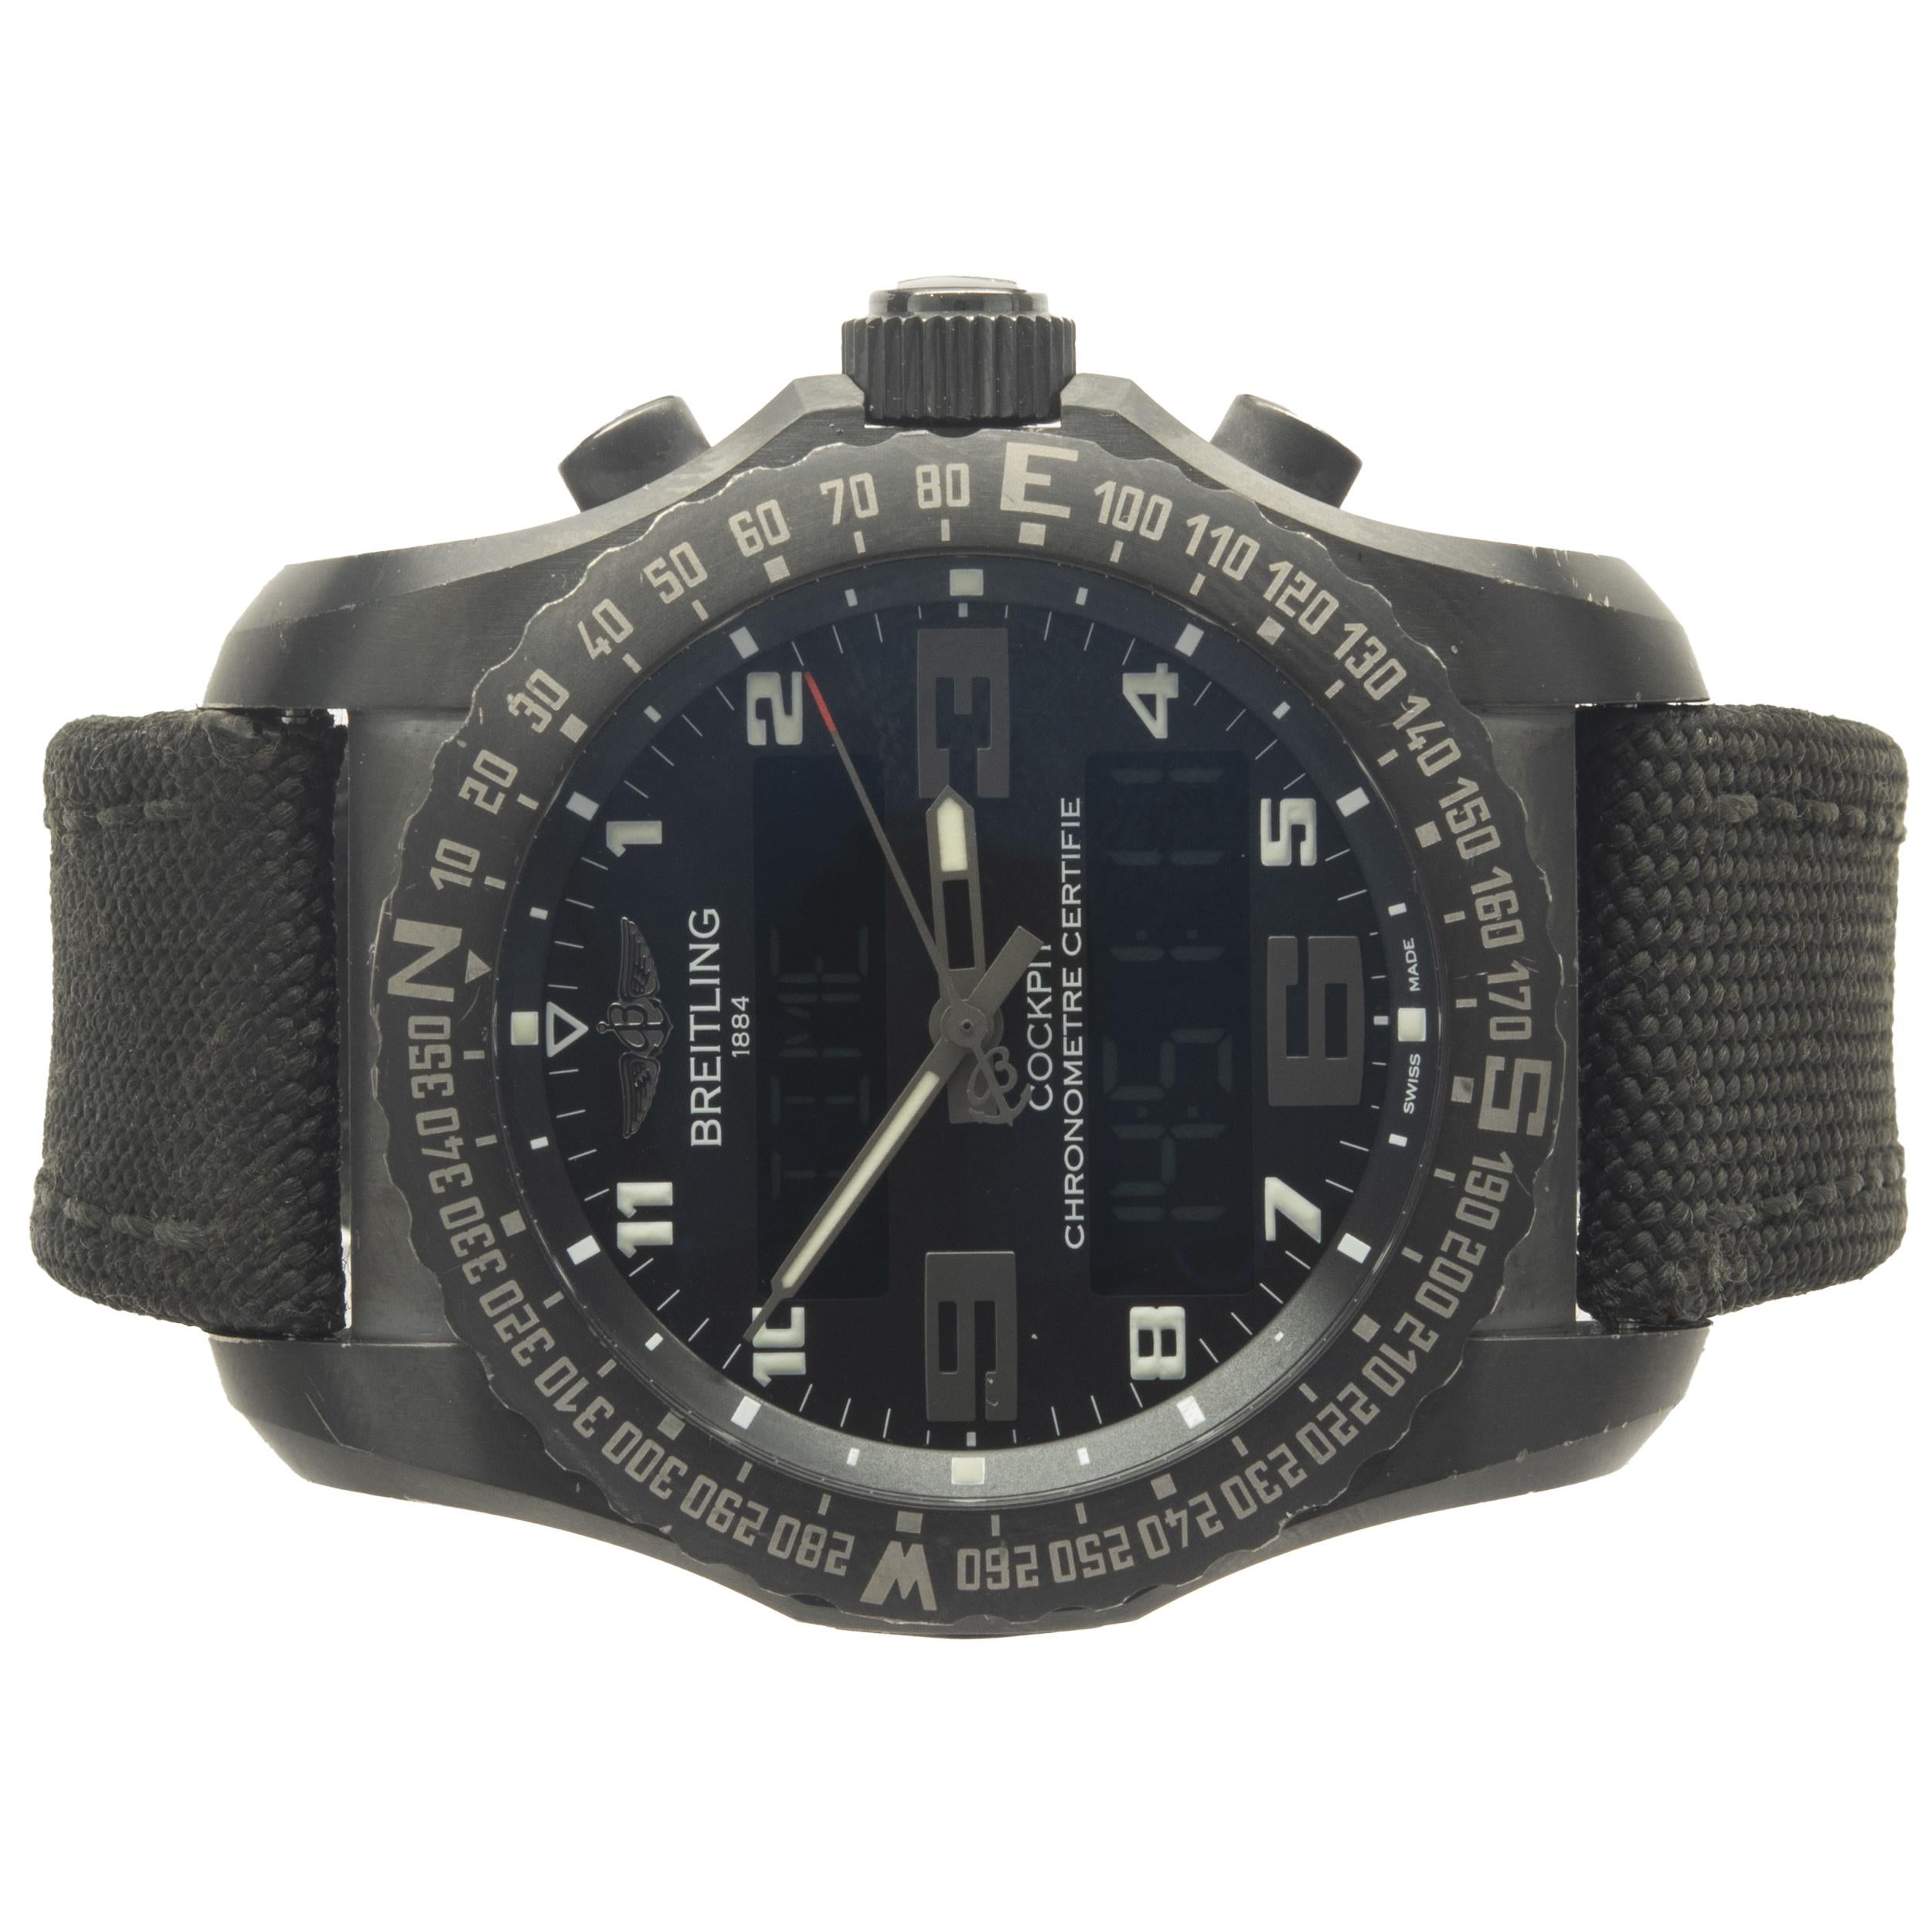 Movement: automatic
Function: hours, minutes, seconds, date, digital, perpetual, timer, alarm, UTC world time
Case: round 46mm black titanium case, uni-directional rotating bezel, sapphire protective crystal, Breitling engraved case-back, screw-down